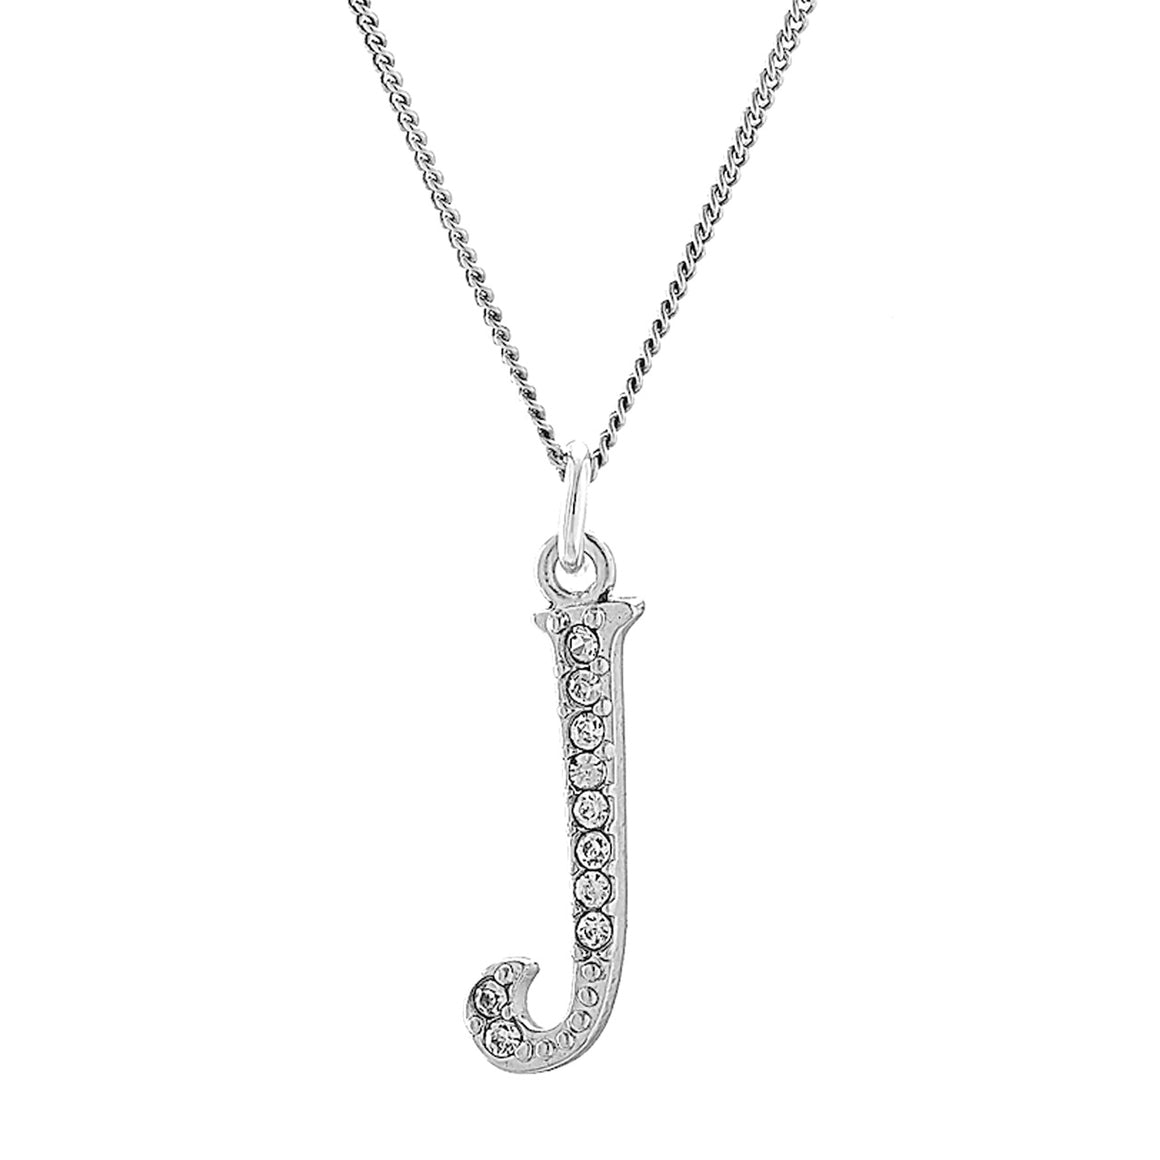 Cubic Zirconia Initial Pendant with 18" Chain - "J"